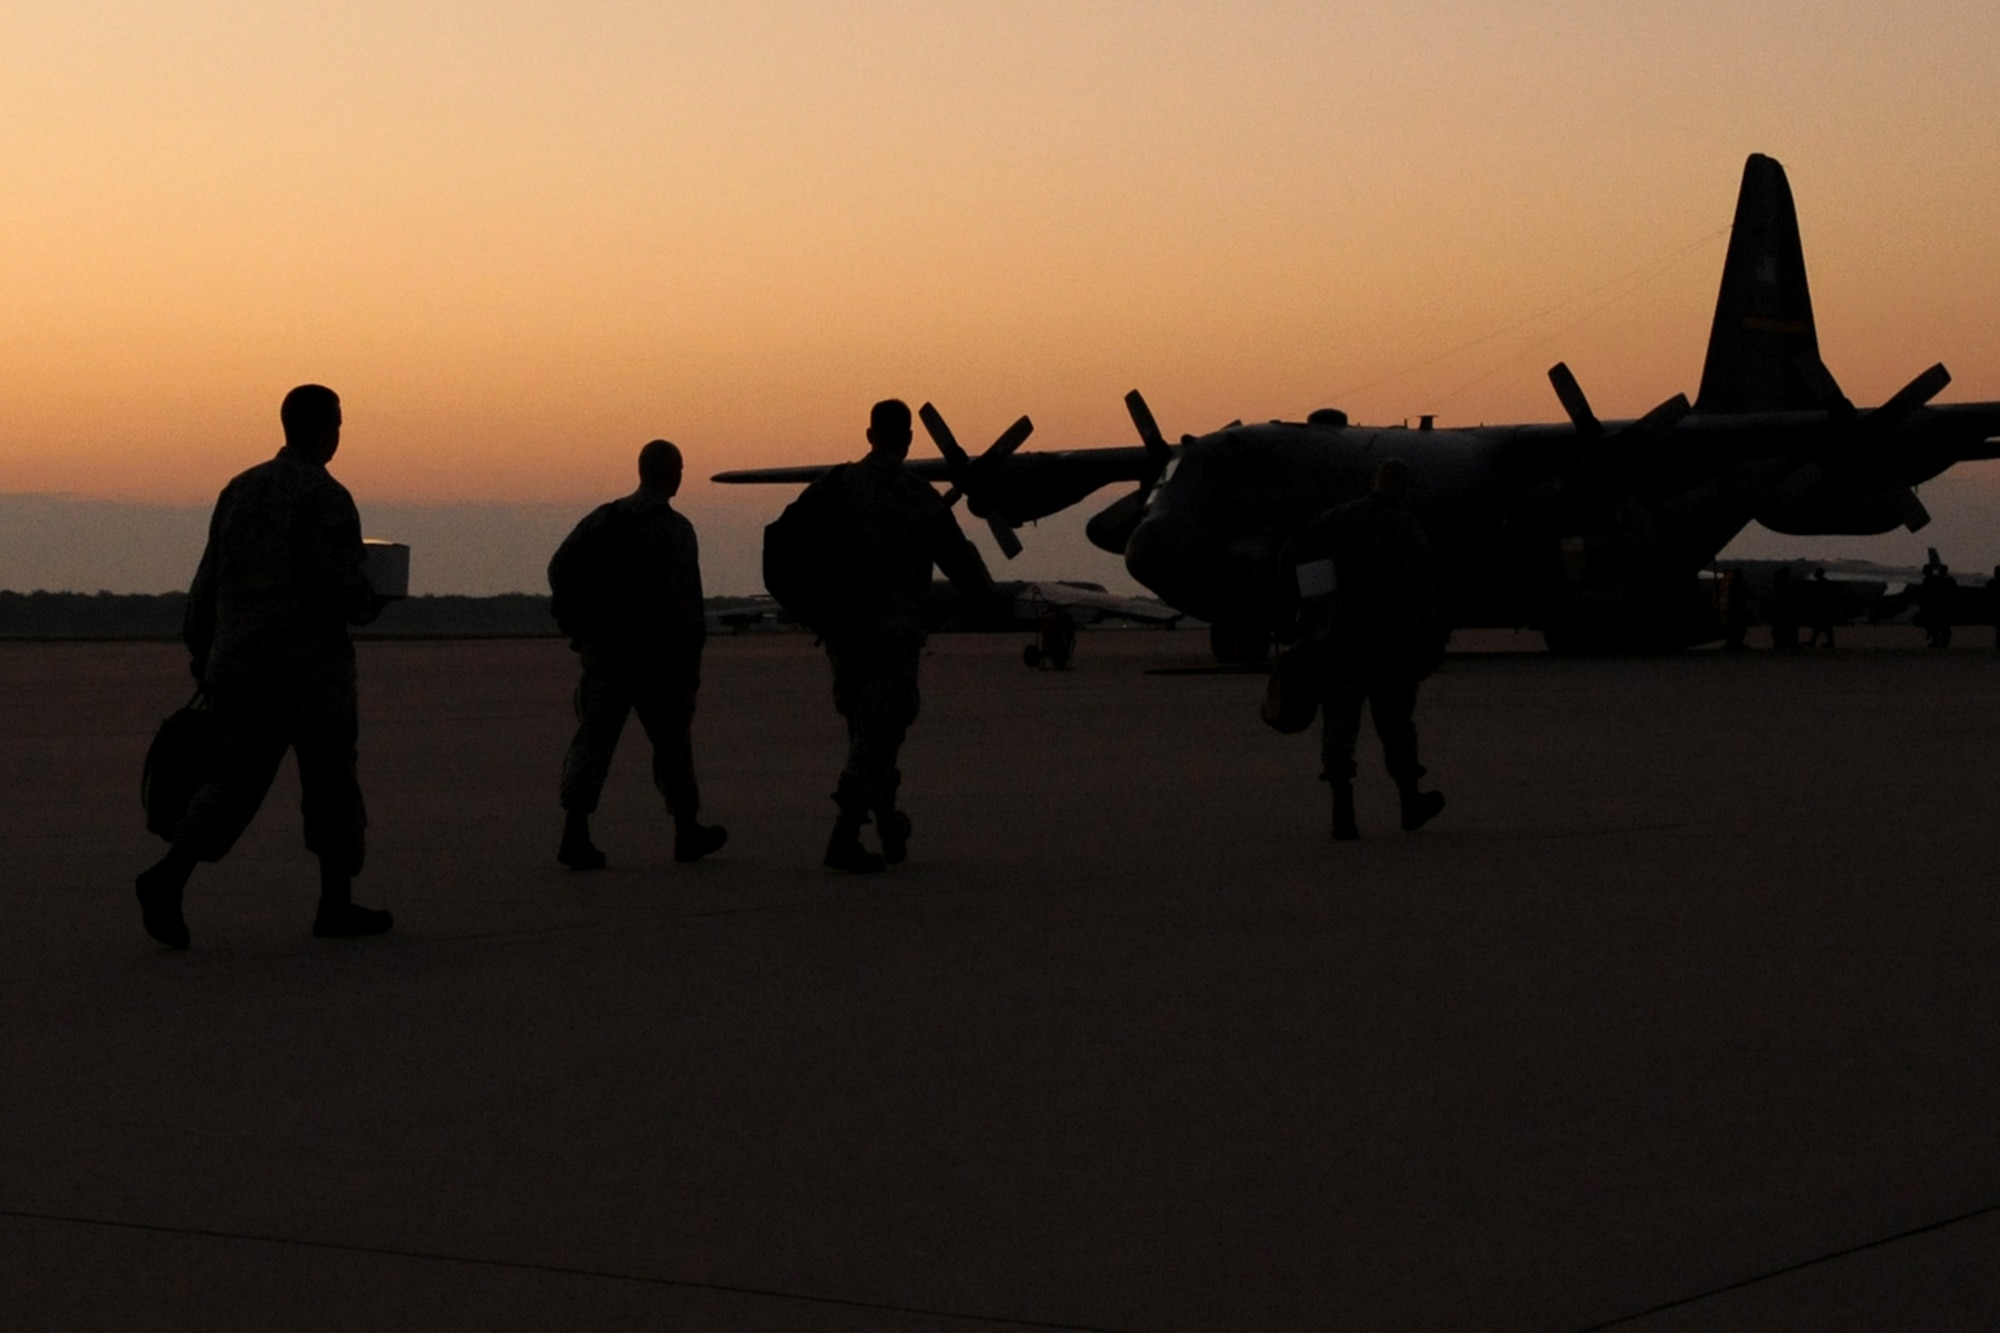 The sun rises on a group of 917th Fighter Group personnel as they walk toward an awaiting C-130 Hercules at Barksdale Air Force Base, La., Sept. 21, 2011. The personnel are assigned to the 917th Maintenance Squadron and deployed to an unknown location in support of Operation Enduring Freedom. (U.S. Air Force photo by Master Sgt. Greg Steele/Released)